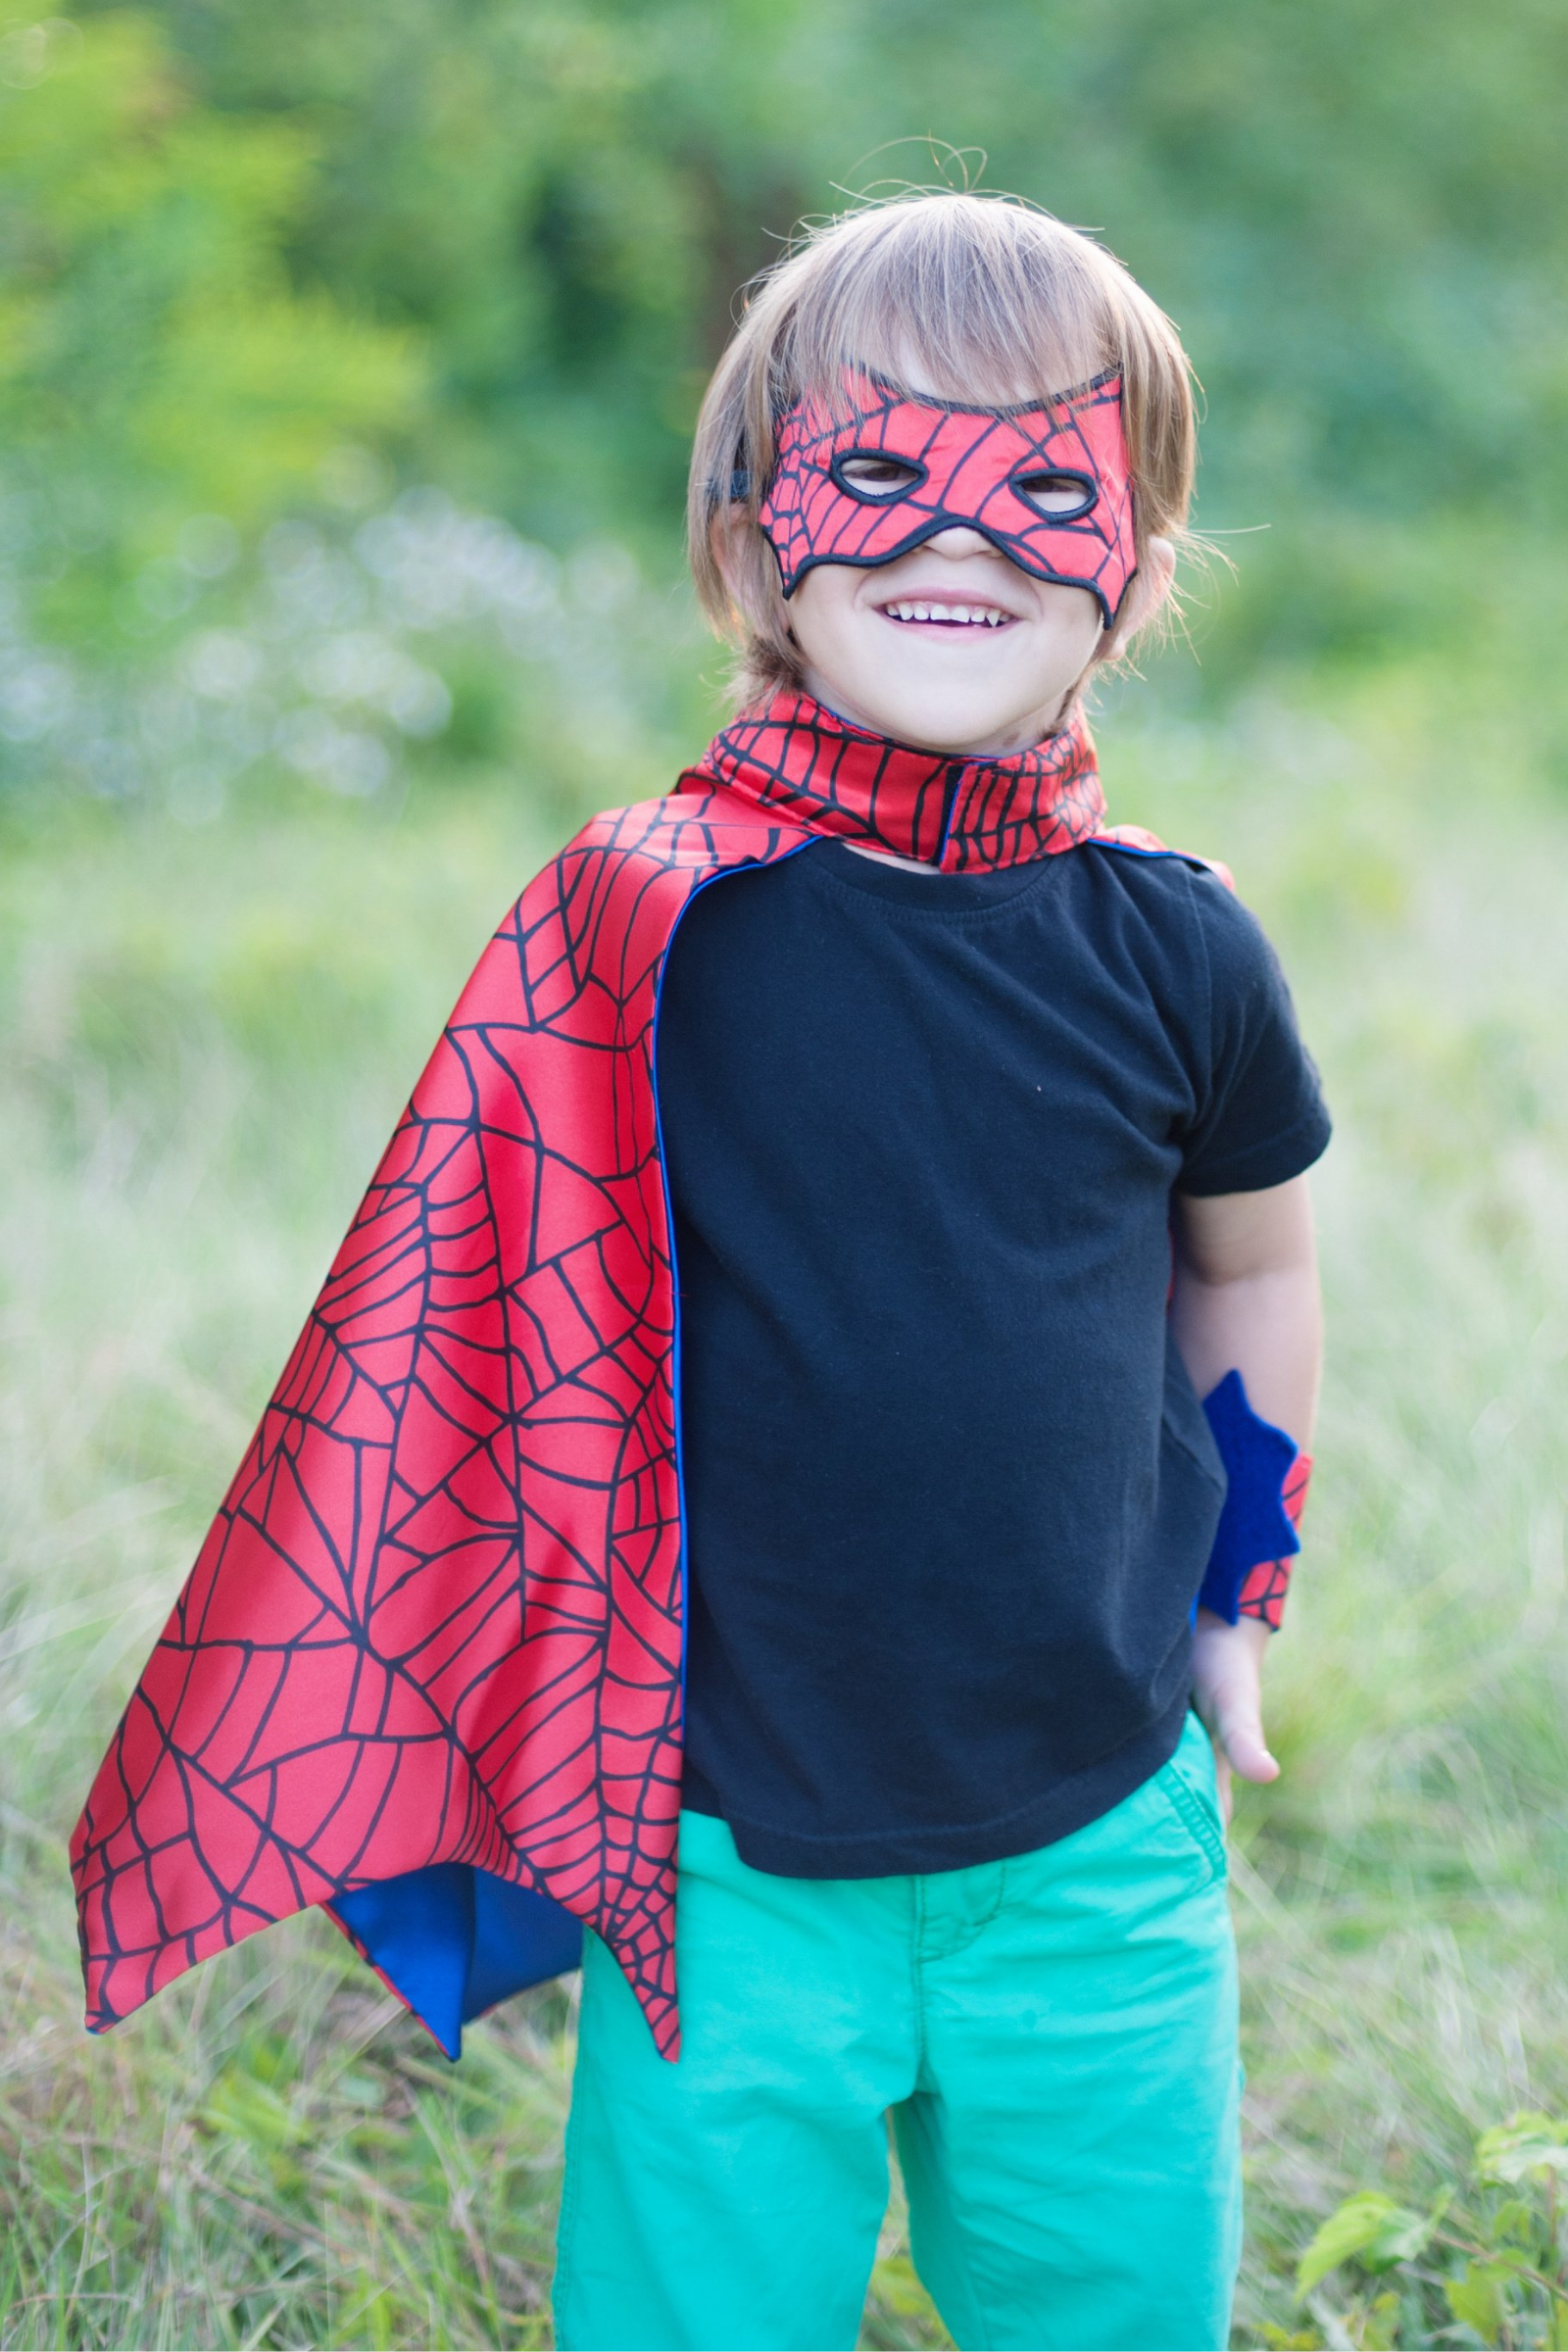 Spider Cape Set with Mask and Cuffs